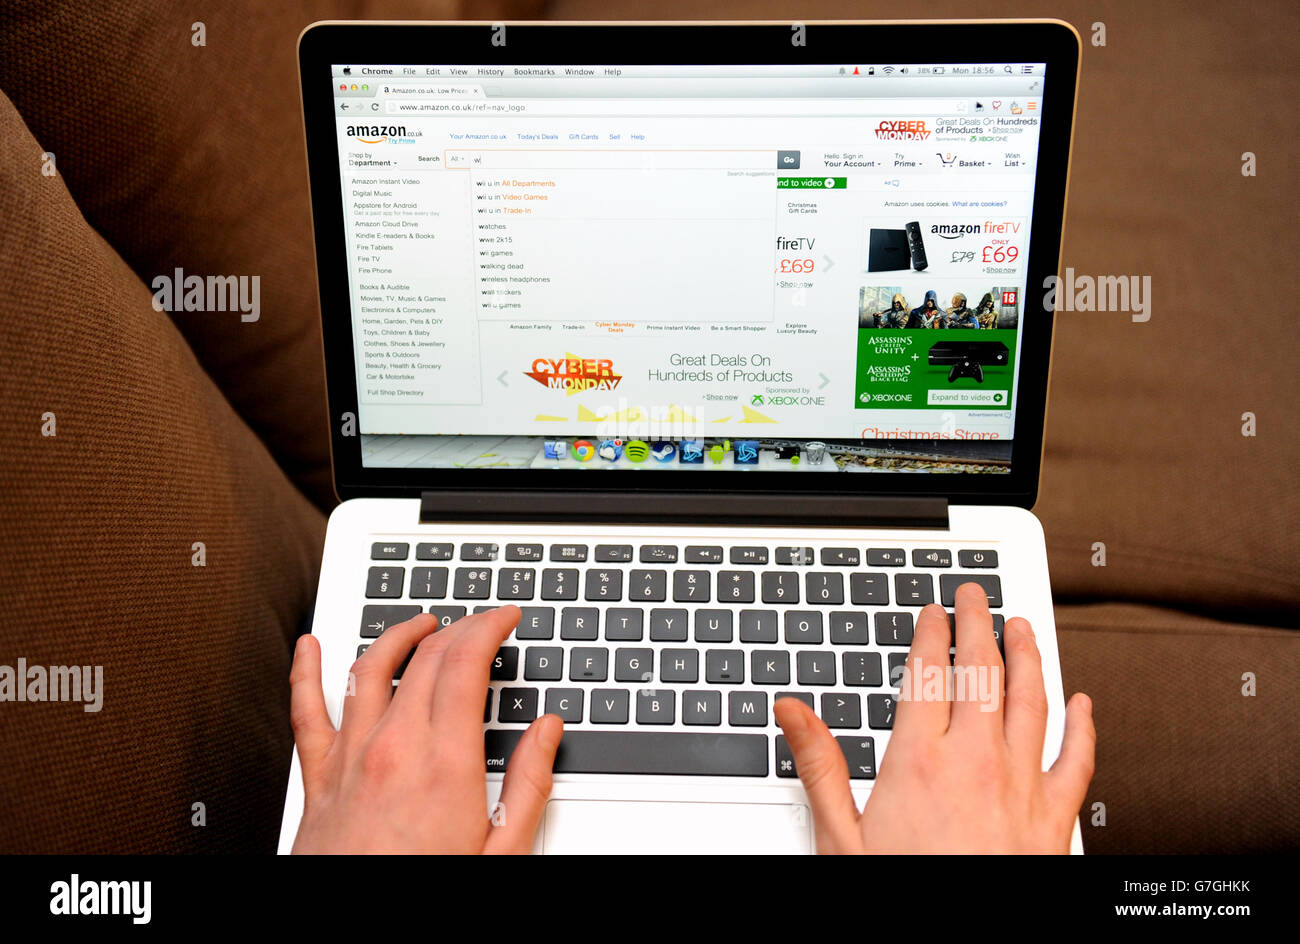 A woman uses a laptop to browse the Amazon website Stock Photo